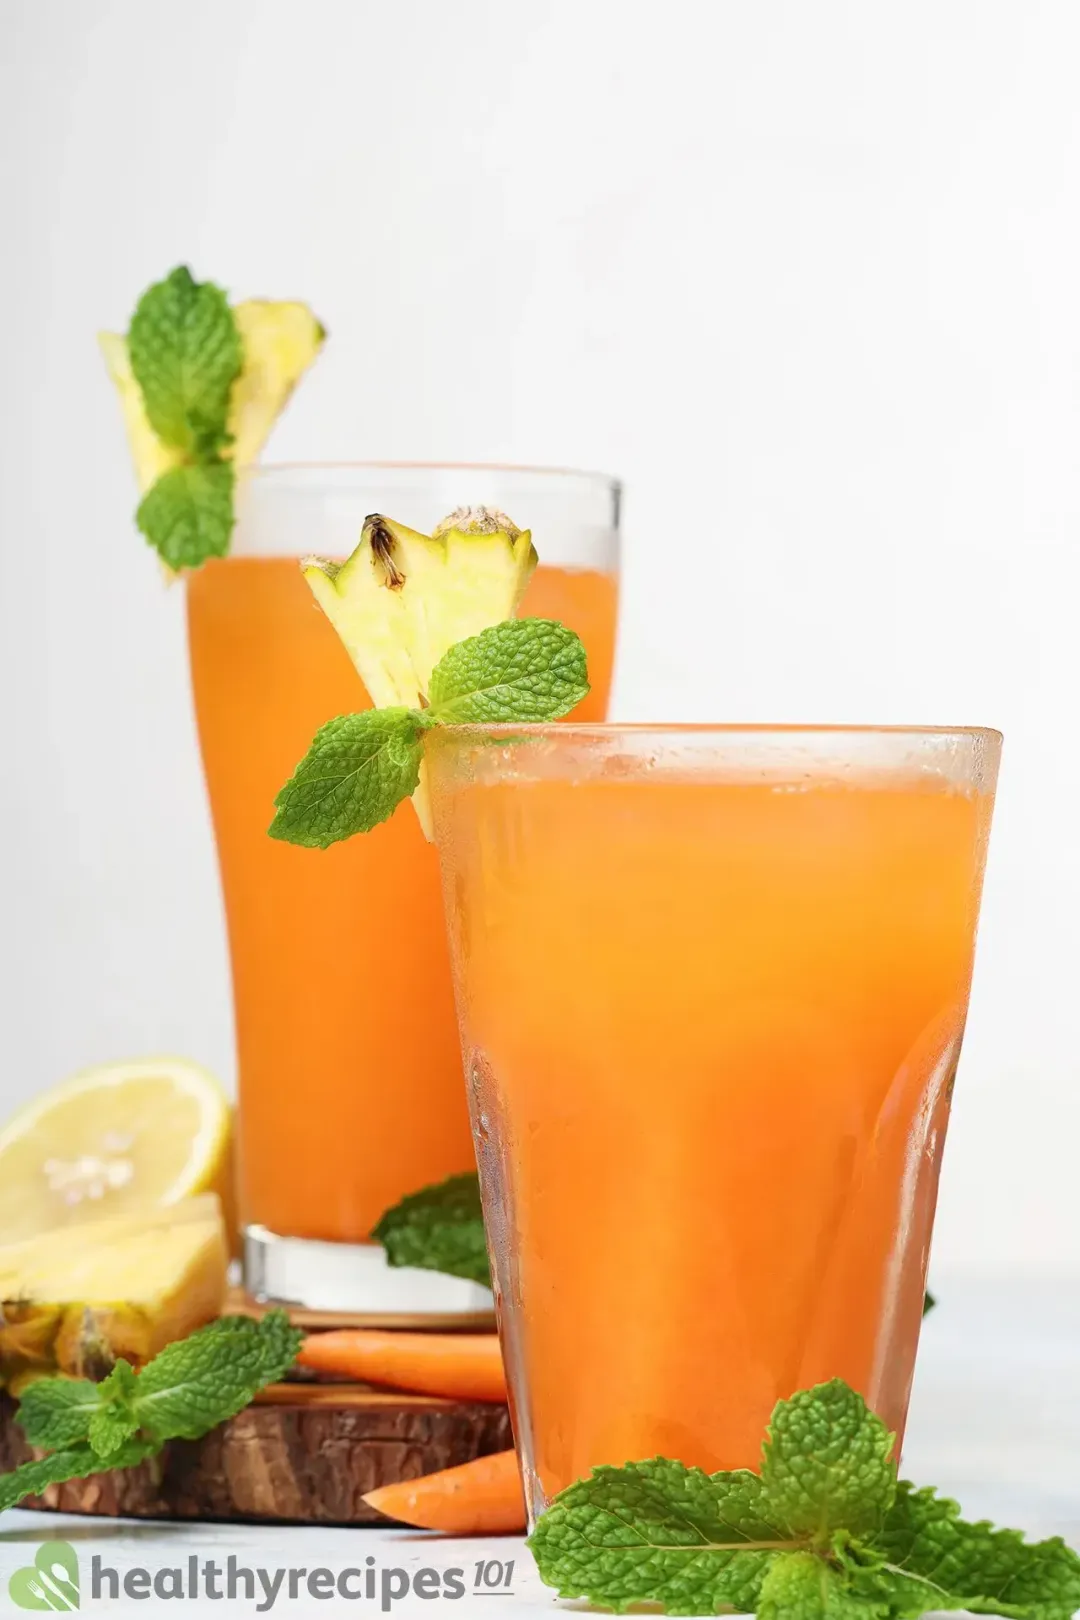 Storage and Freezing the Leftover Pineapple Carrot Juice